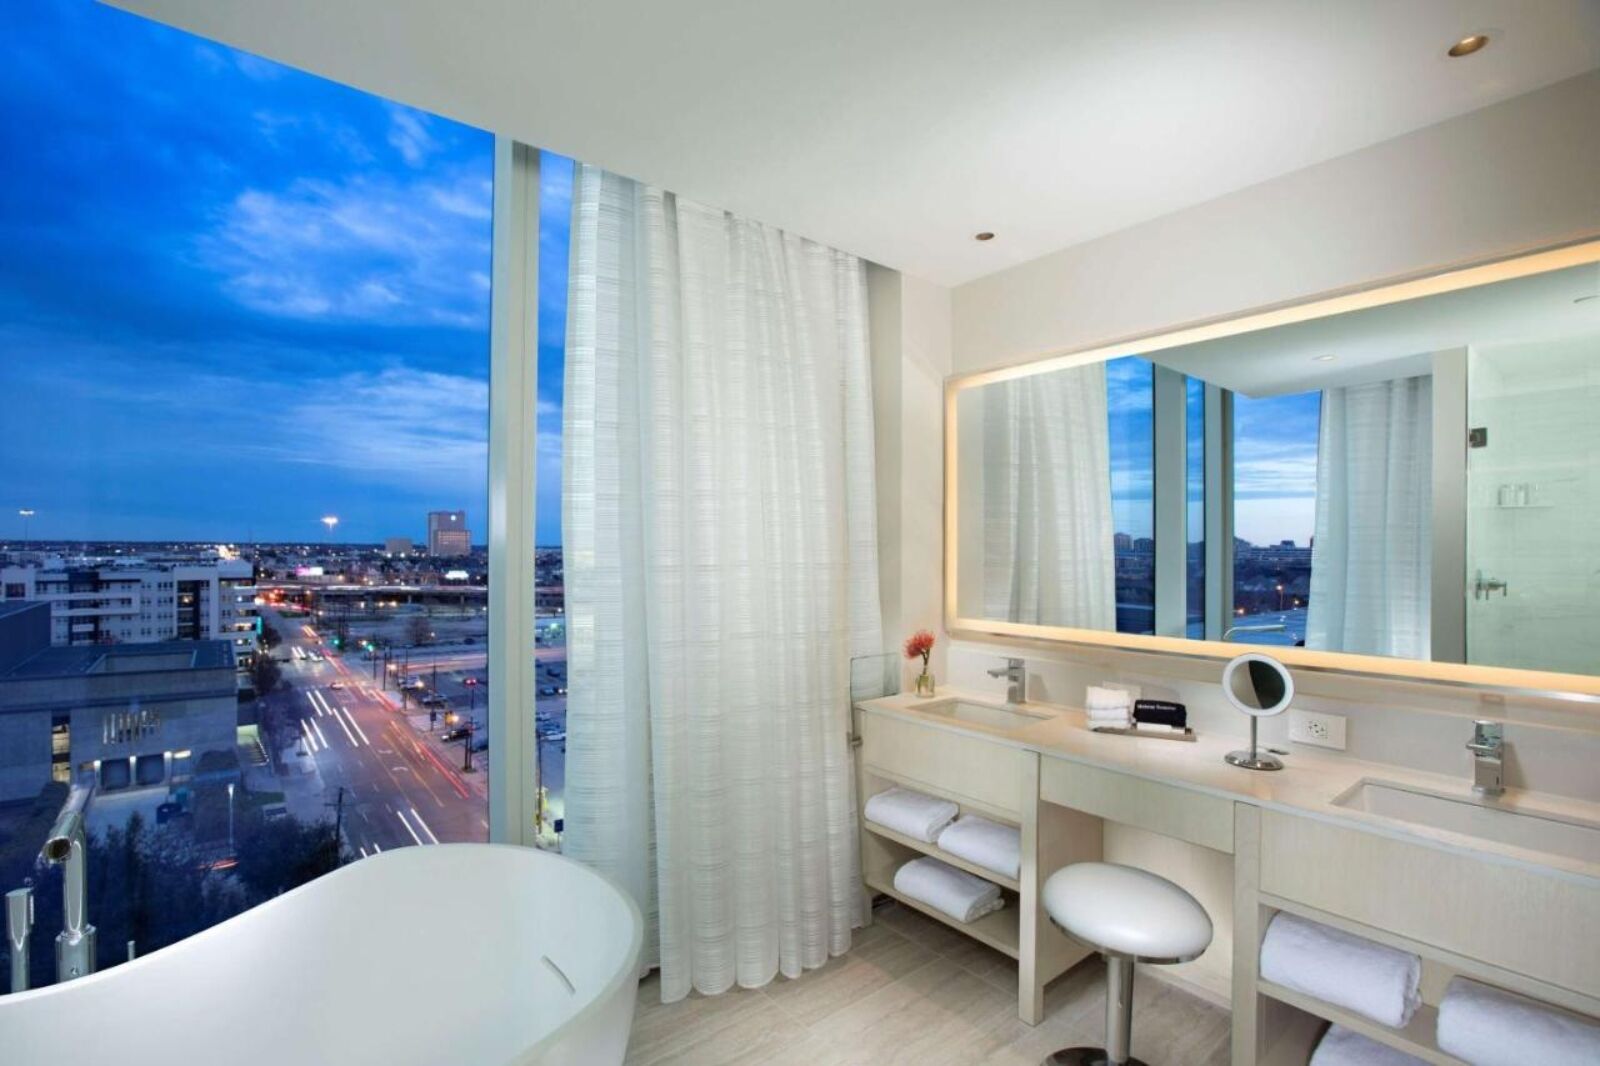 Bathtub with view at HALL Arts Hotel, Dallas, Texas one of the best hotels with big bathtubs in the US